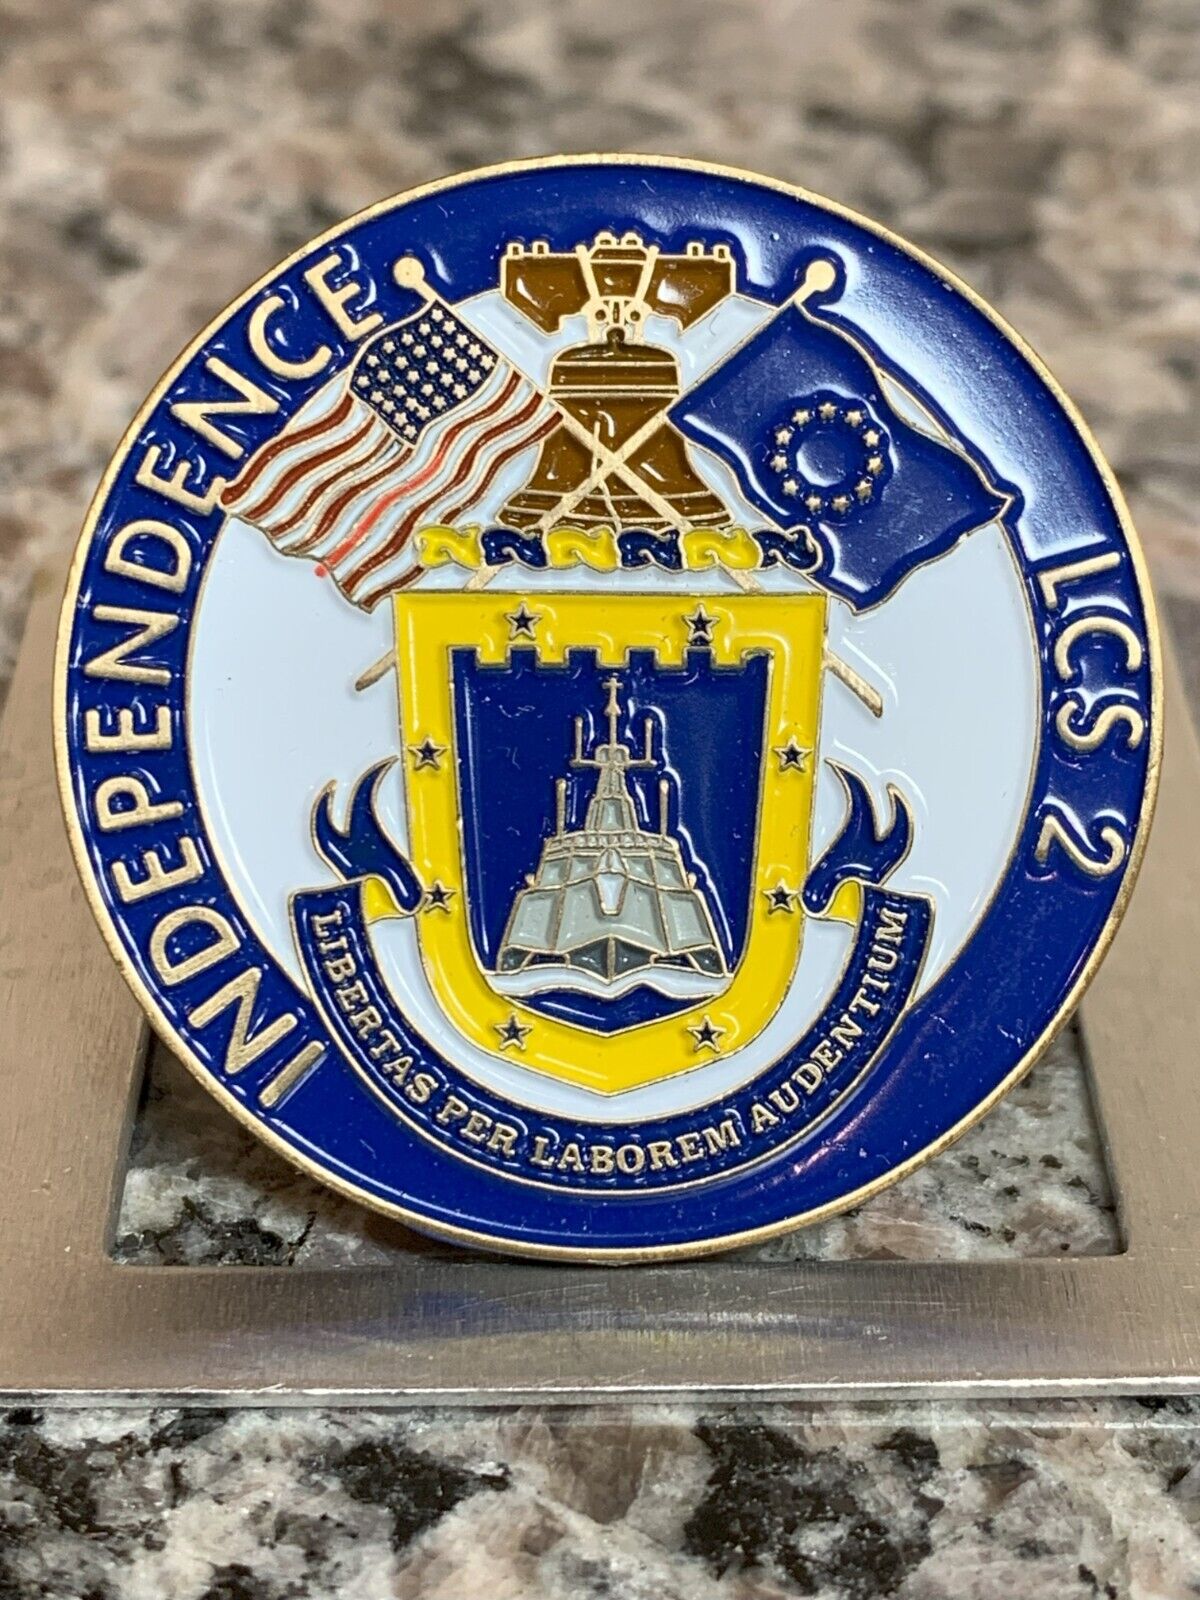 USS Independence LCS 2 Christening medal coin Mobile Alabama